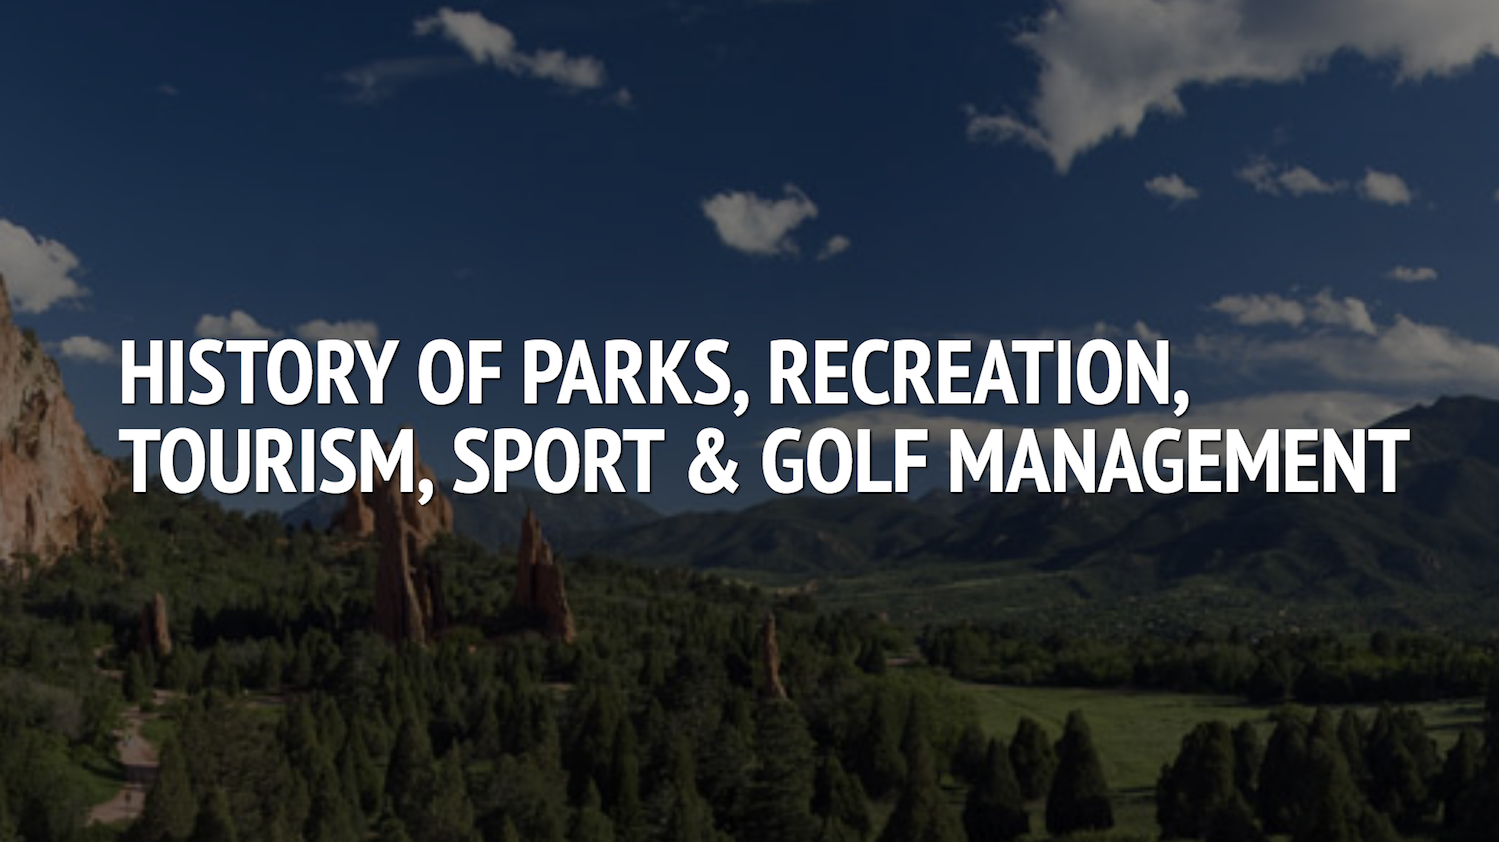 "History of Parks, Recreation, Tourism, Sport and Golf Management"